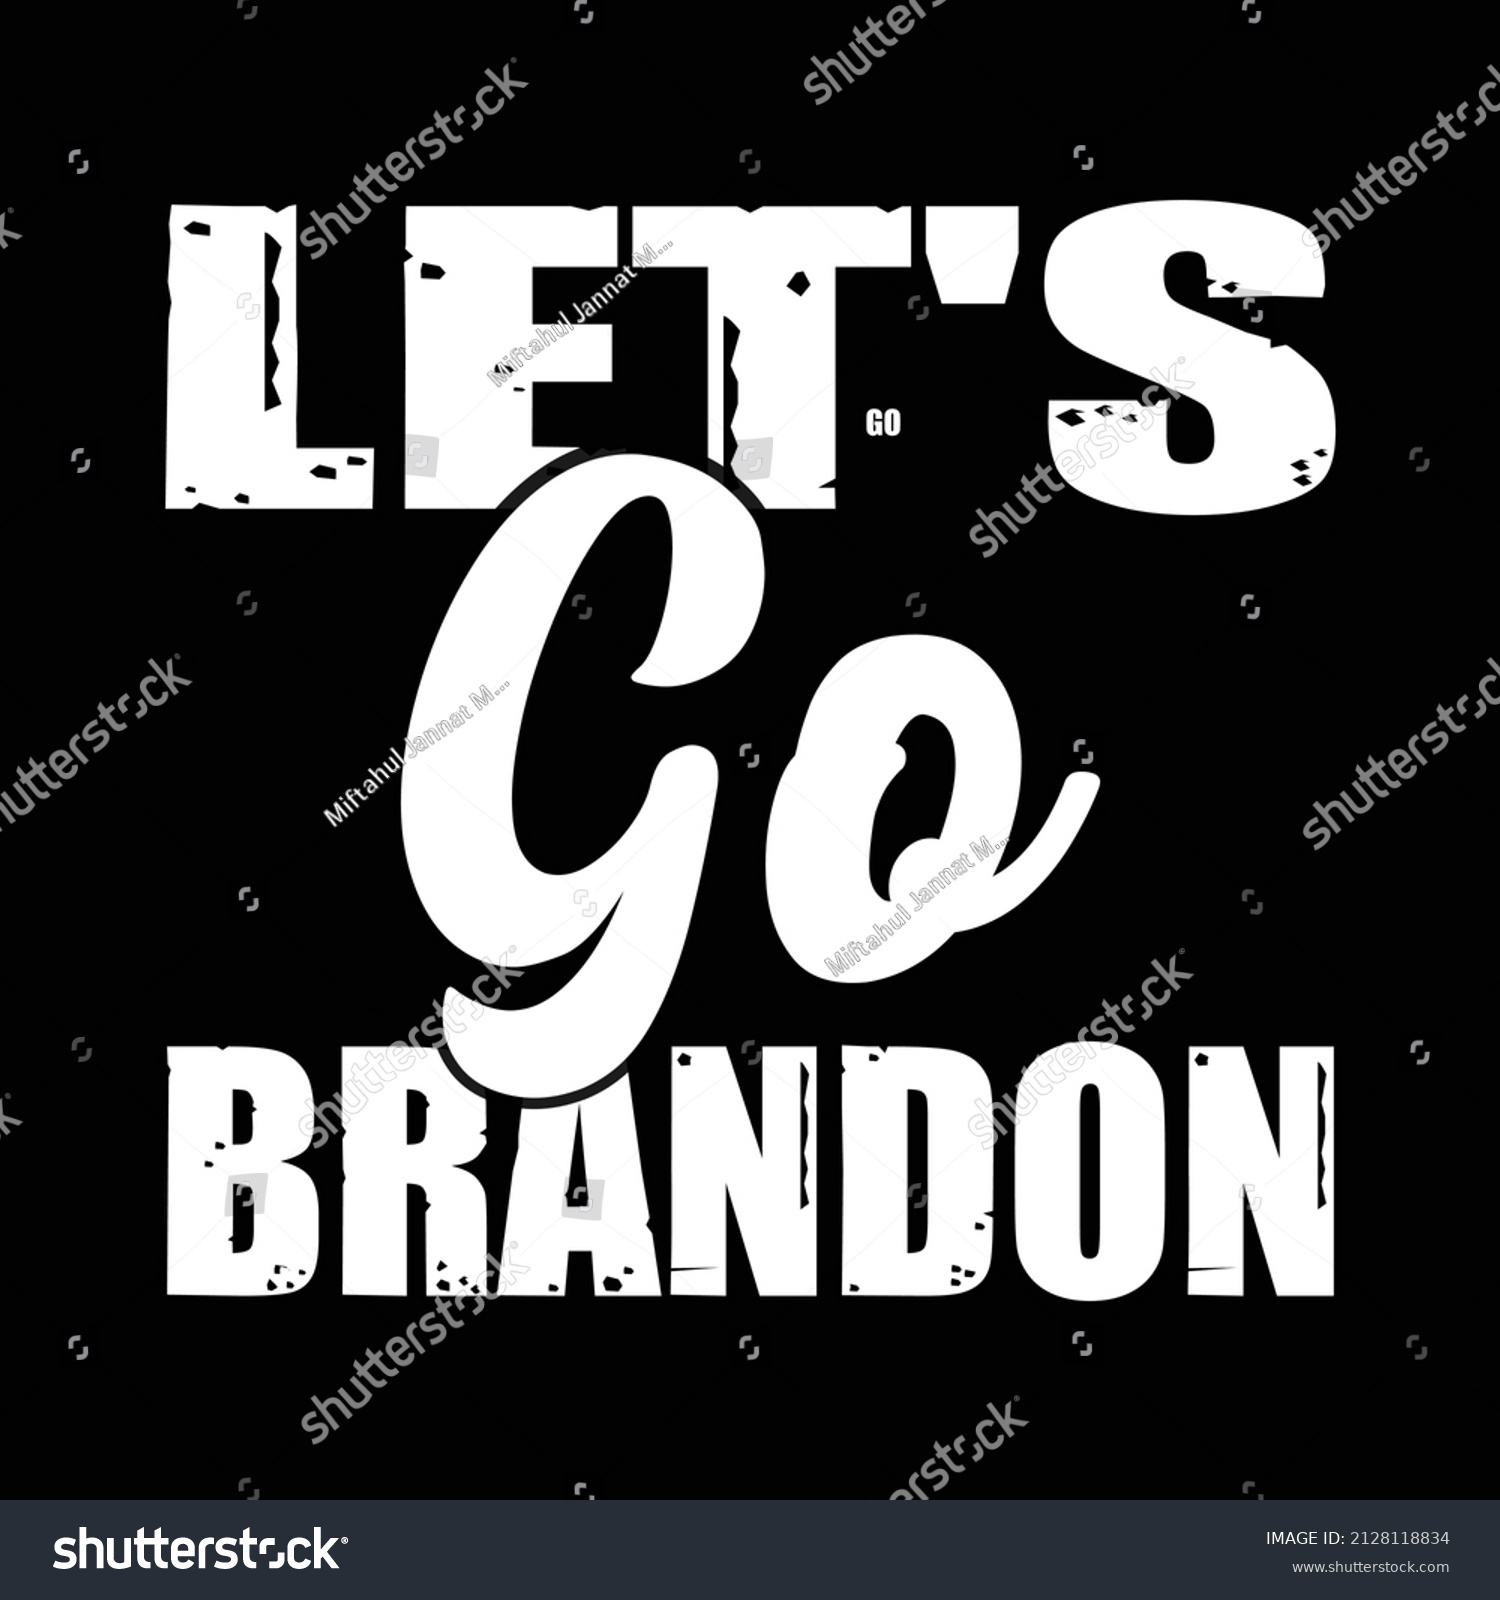 SVG of Let's go brandon is a typography and brand name t- shirt design.It is a wonderfull and eye-catching t-shirt design. svg